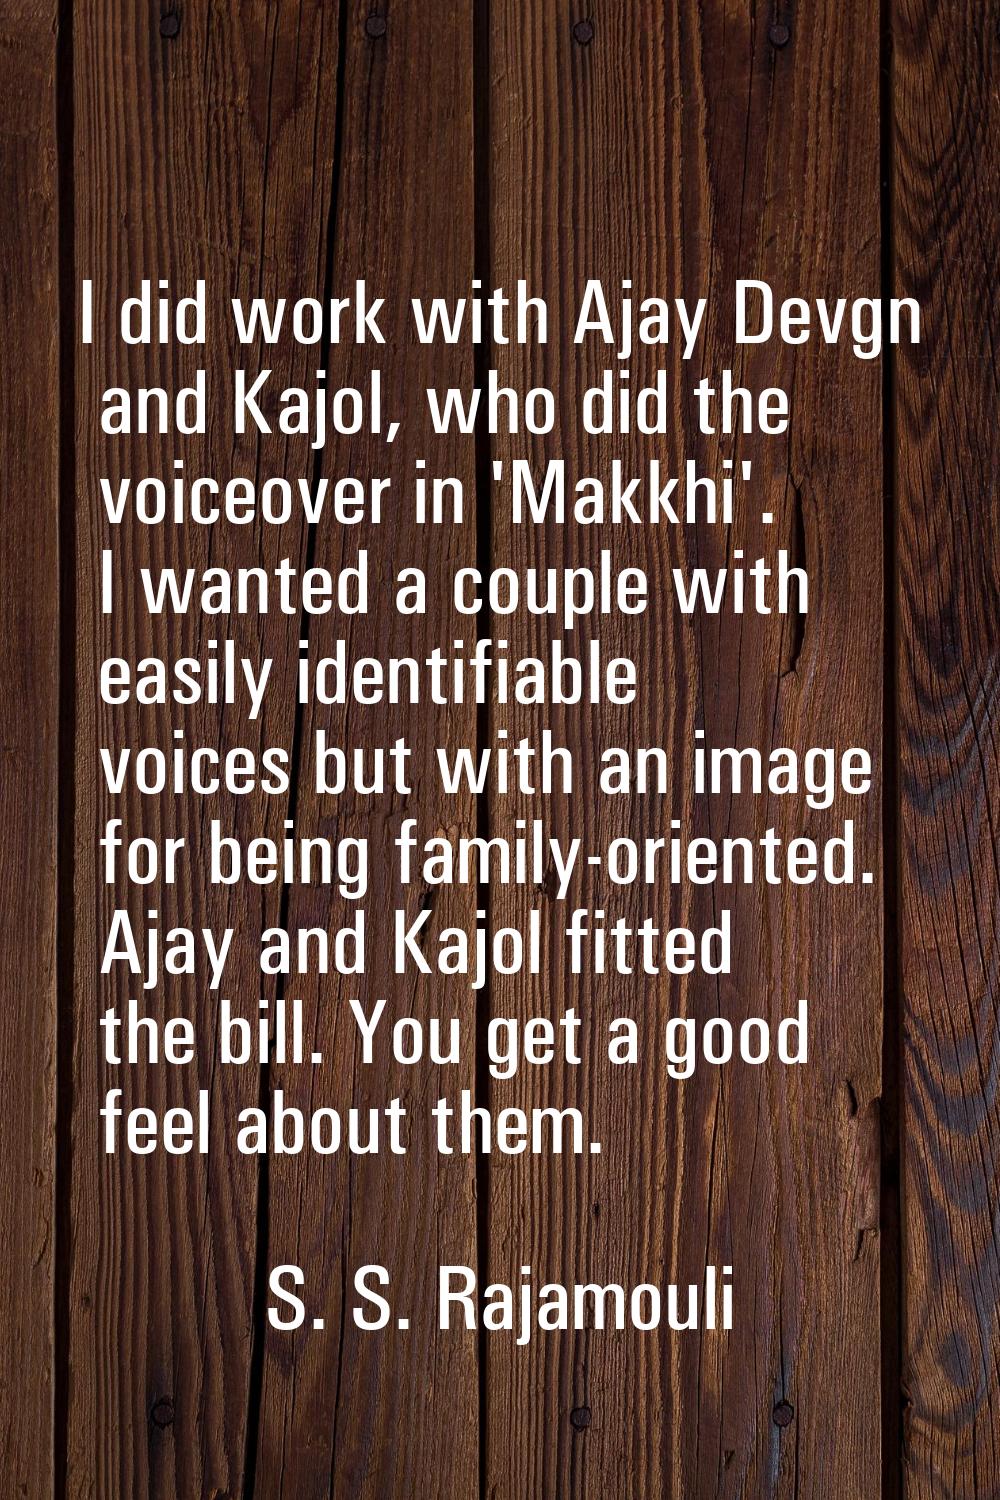 I did work with Ajay Devgn and Kajol, who did the voiceover in 'Makkhi'. I wanted a couple with eas